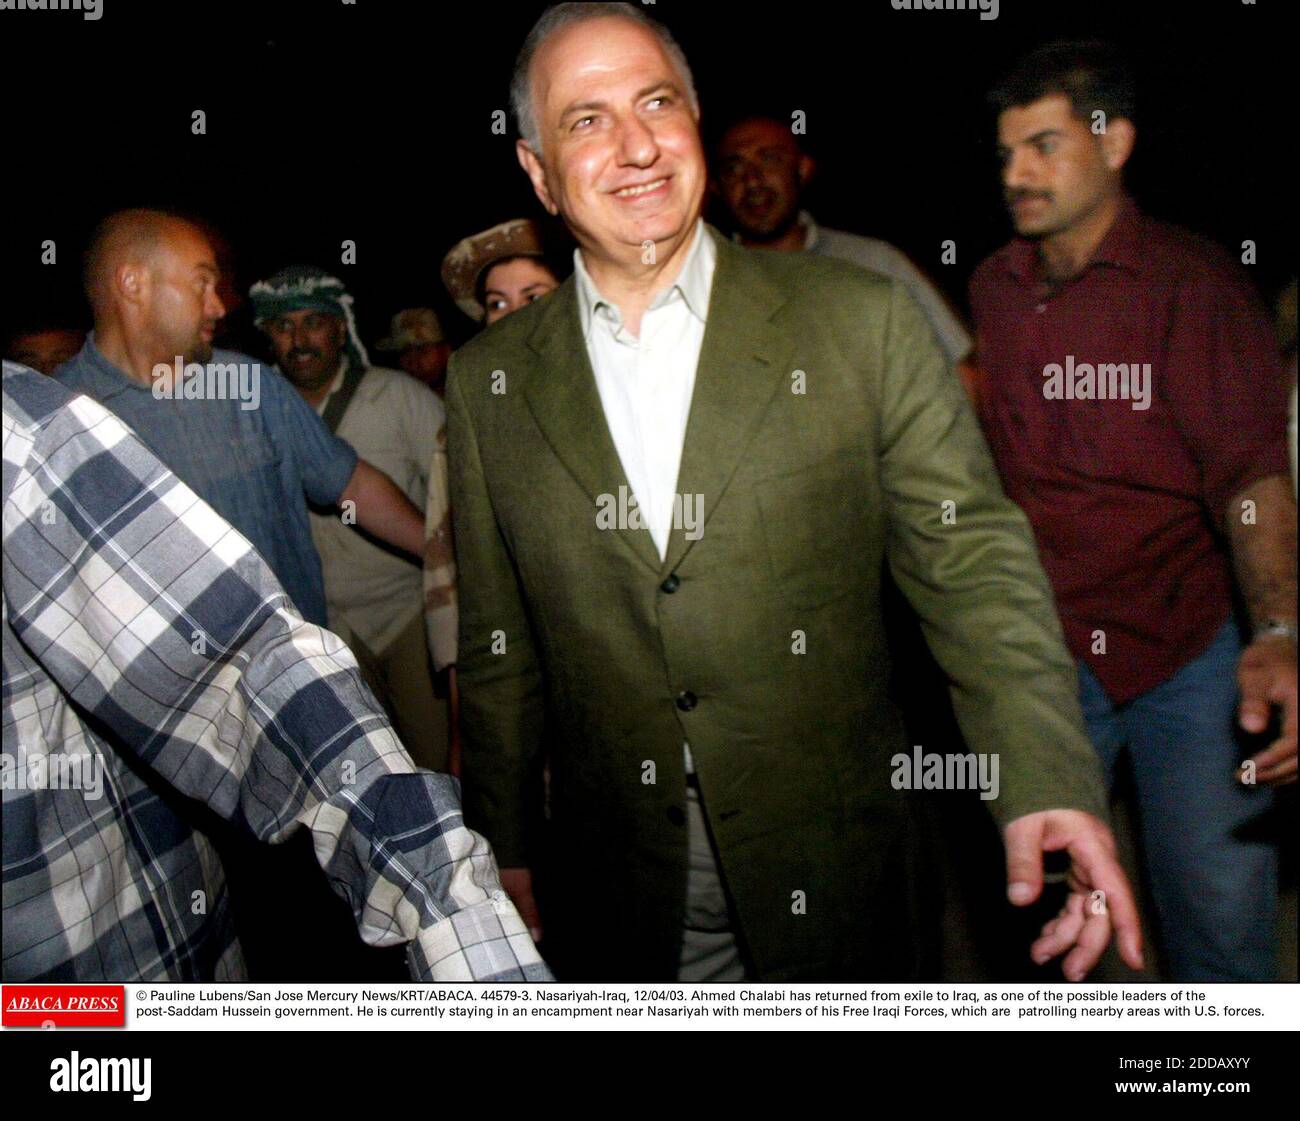 NO FILM, NO VIDEO, NO TV, NO DOCUMENTARY - © Pauline Lubens/San Jose Mercury News/KRT/ABACA. 44579-3. Nasariyah-Iraq, 12/04/03. Ahmed Chalabi has returned from exile to Iraq, as one of the possible leaders of the post-Saddam Hussein government. He is currently staying in an encampment near Nasariy Stock Photo